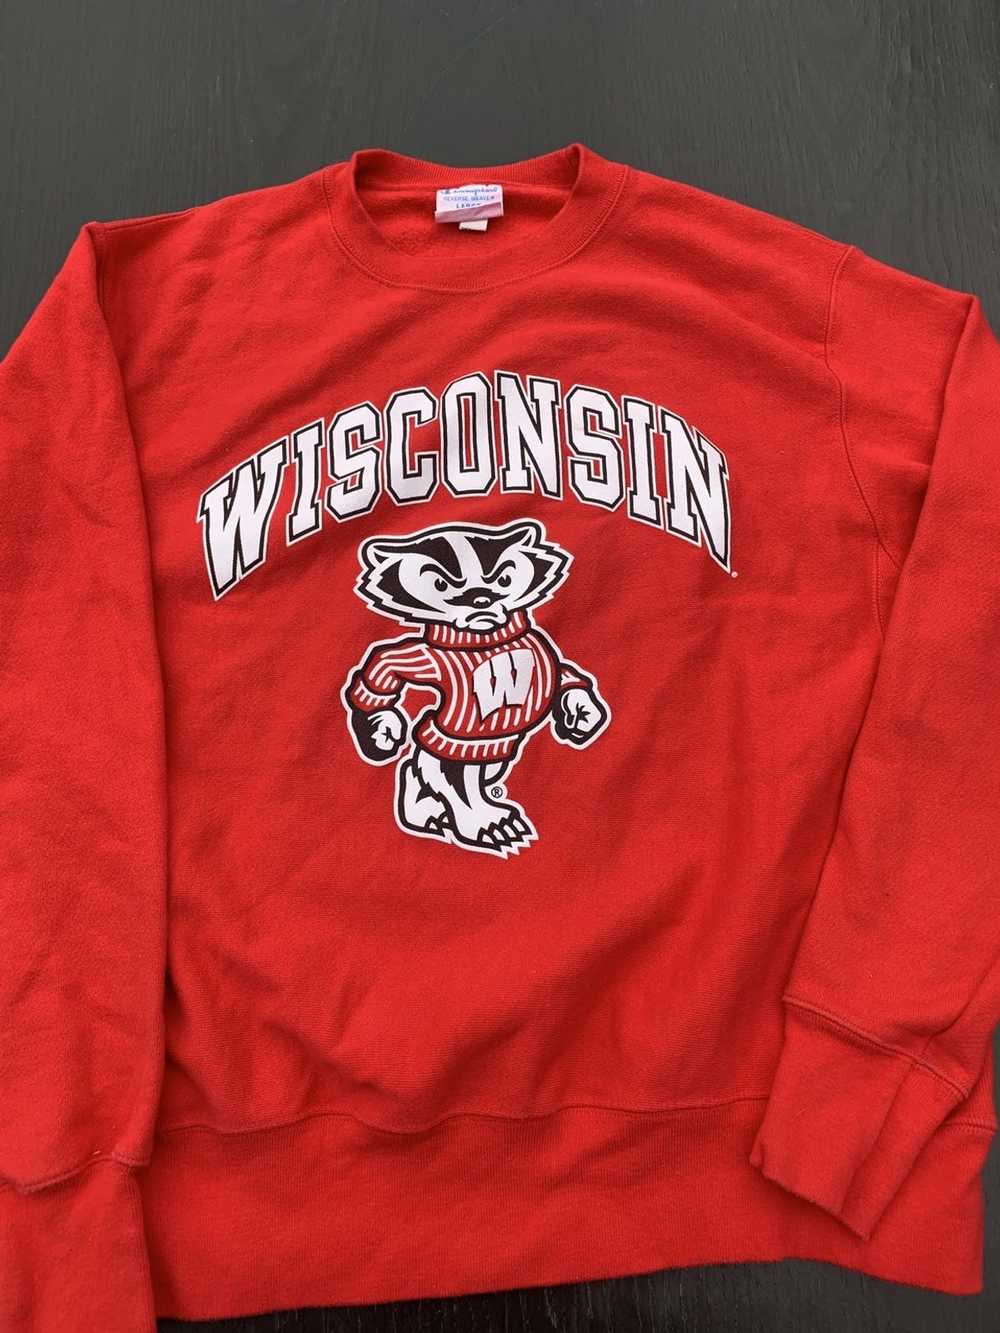 Champion 90’s Wisconsin Badgers REVERSE WEAVE - image 1